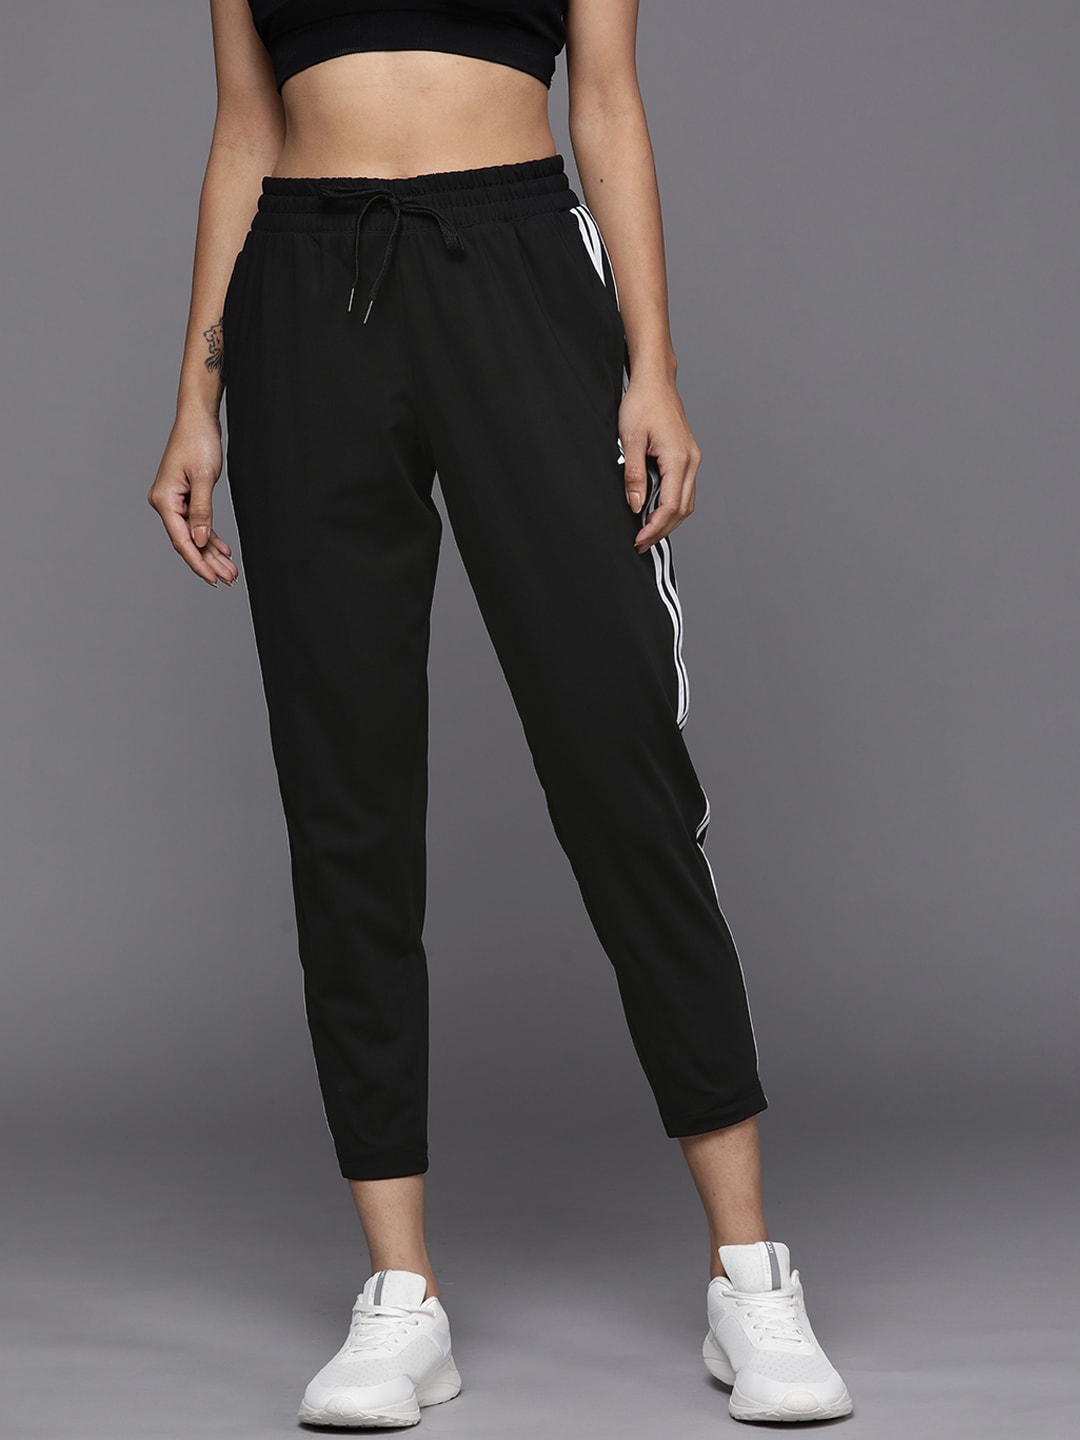 ADIDAS Women Black Solid Side Stripes Cropped Track Pants Price in India